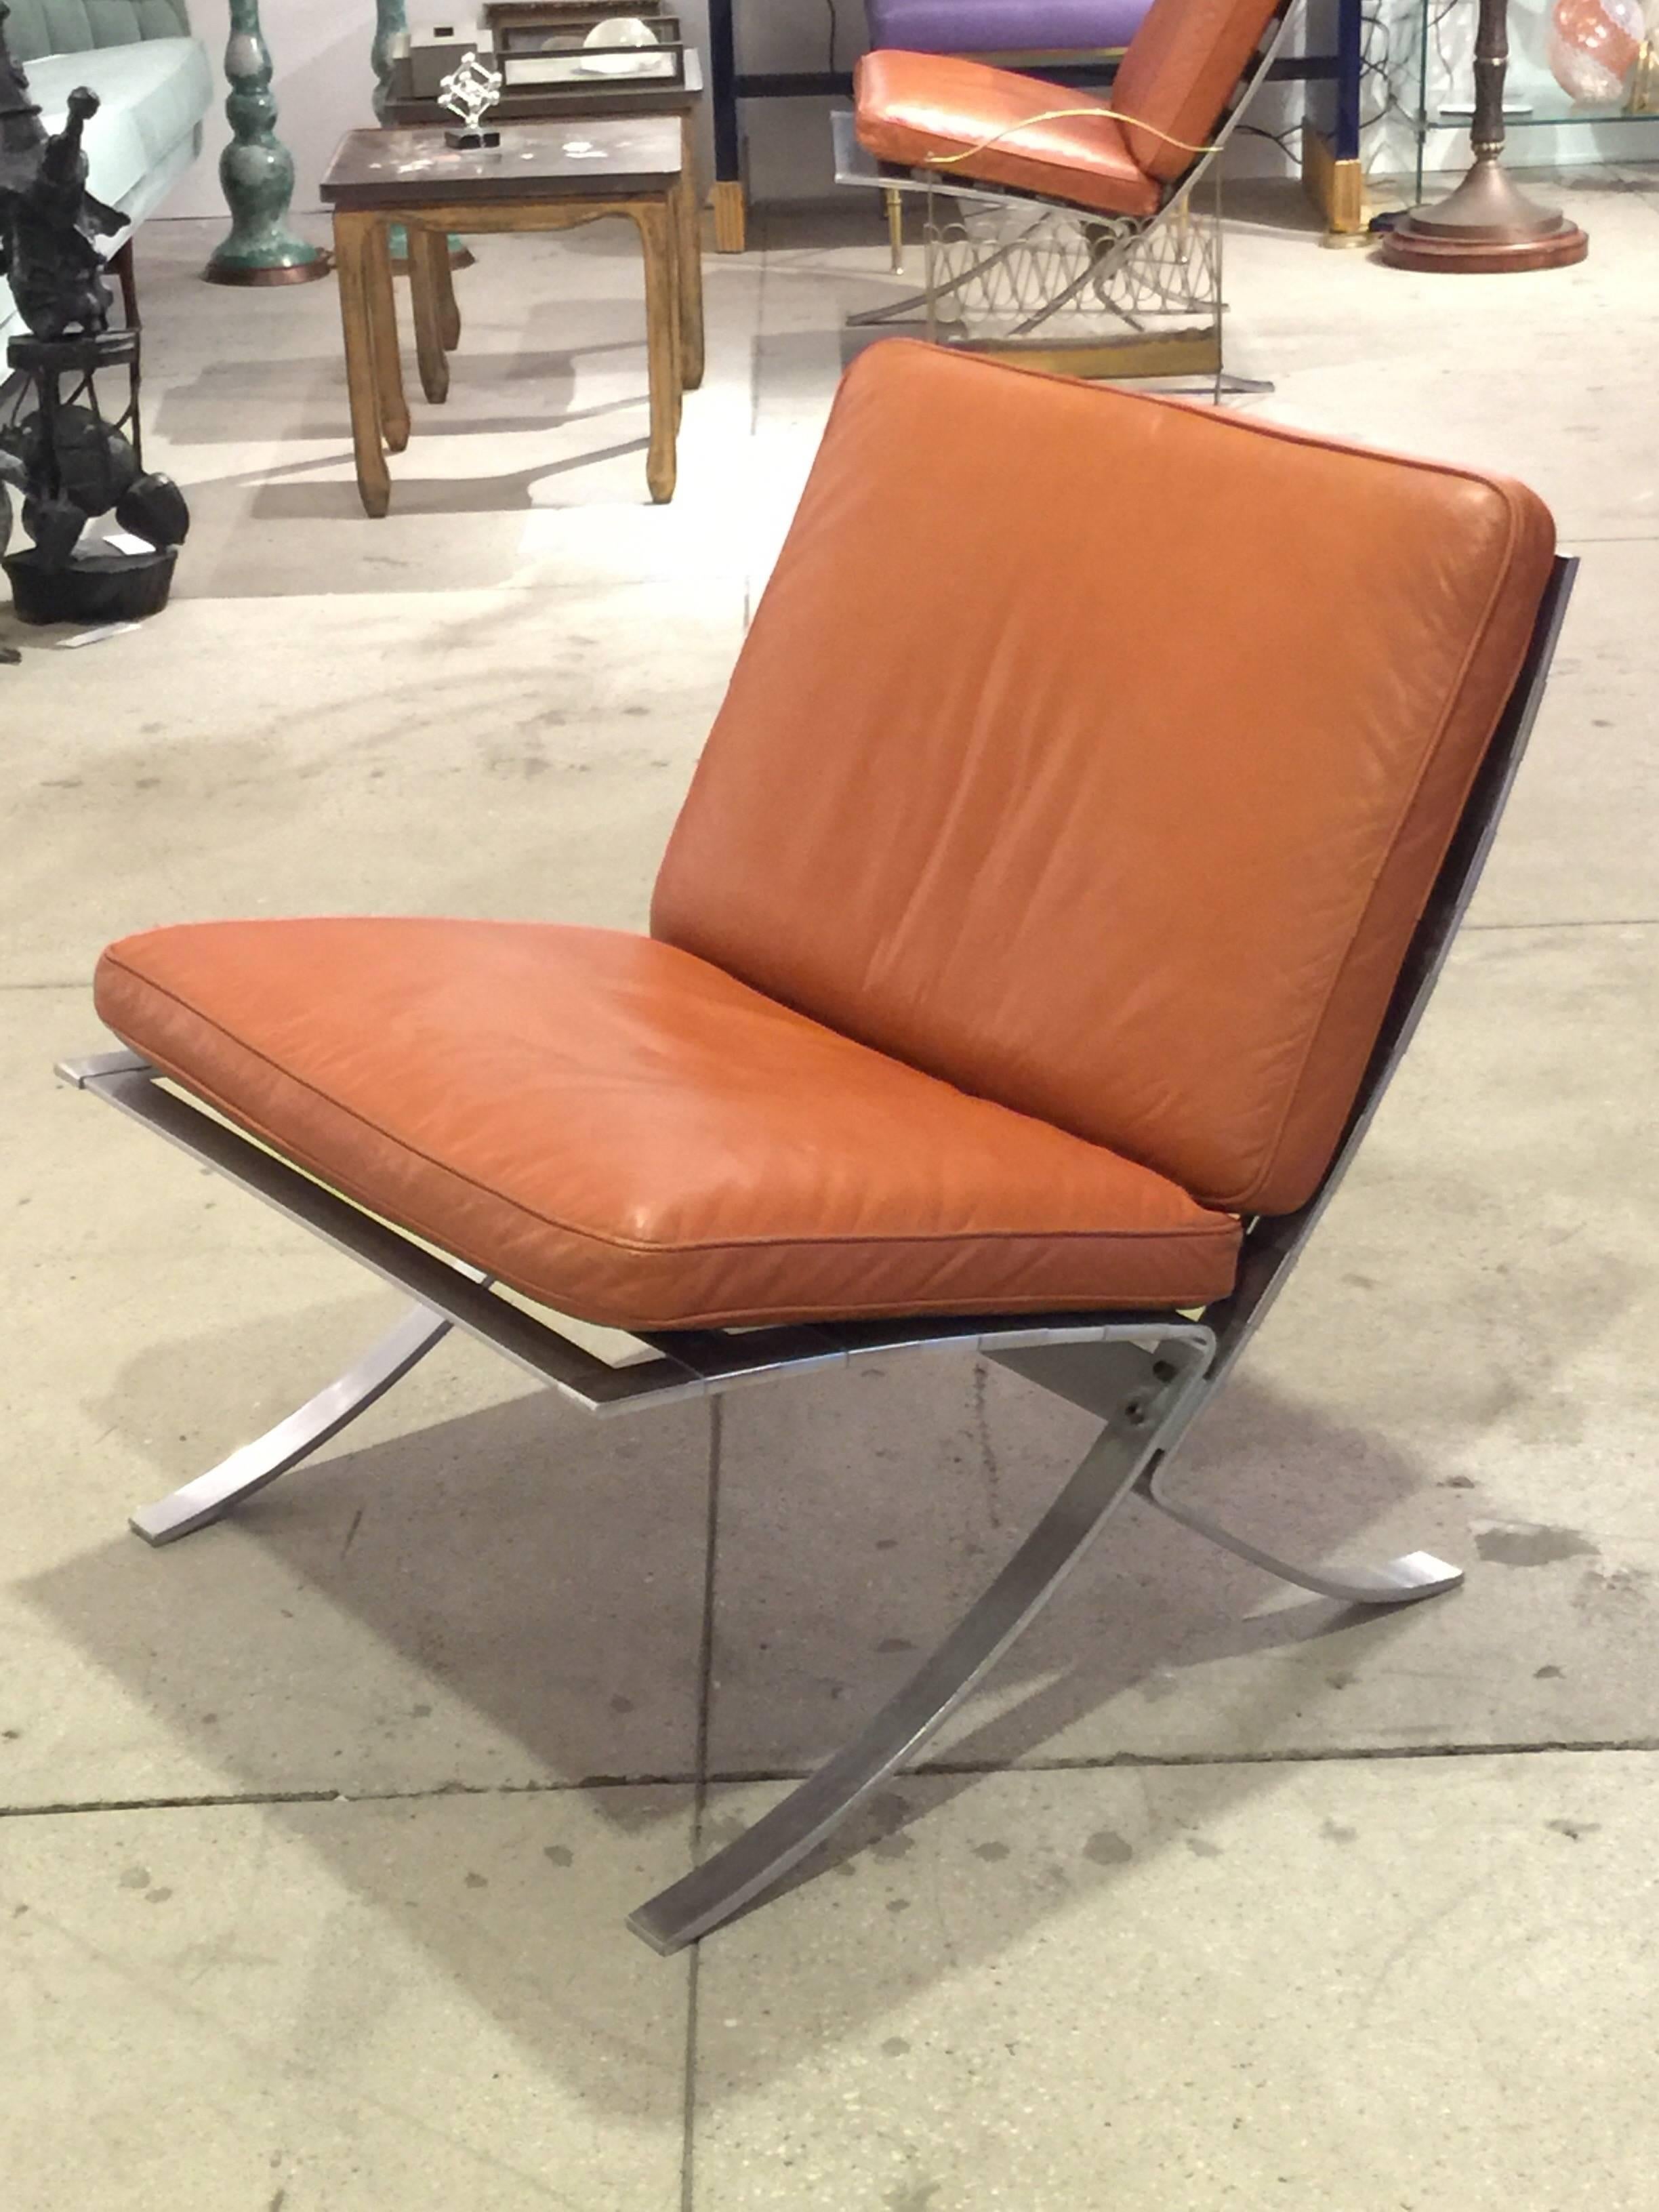 Pair of Mid-Century Modern leather chairs with original upholstery in very good condition. Beautiful steel frame with. Perfect size chair for a lounge or living room area. Not too heavy to move around.